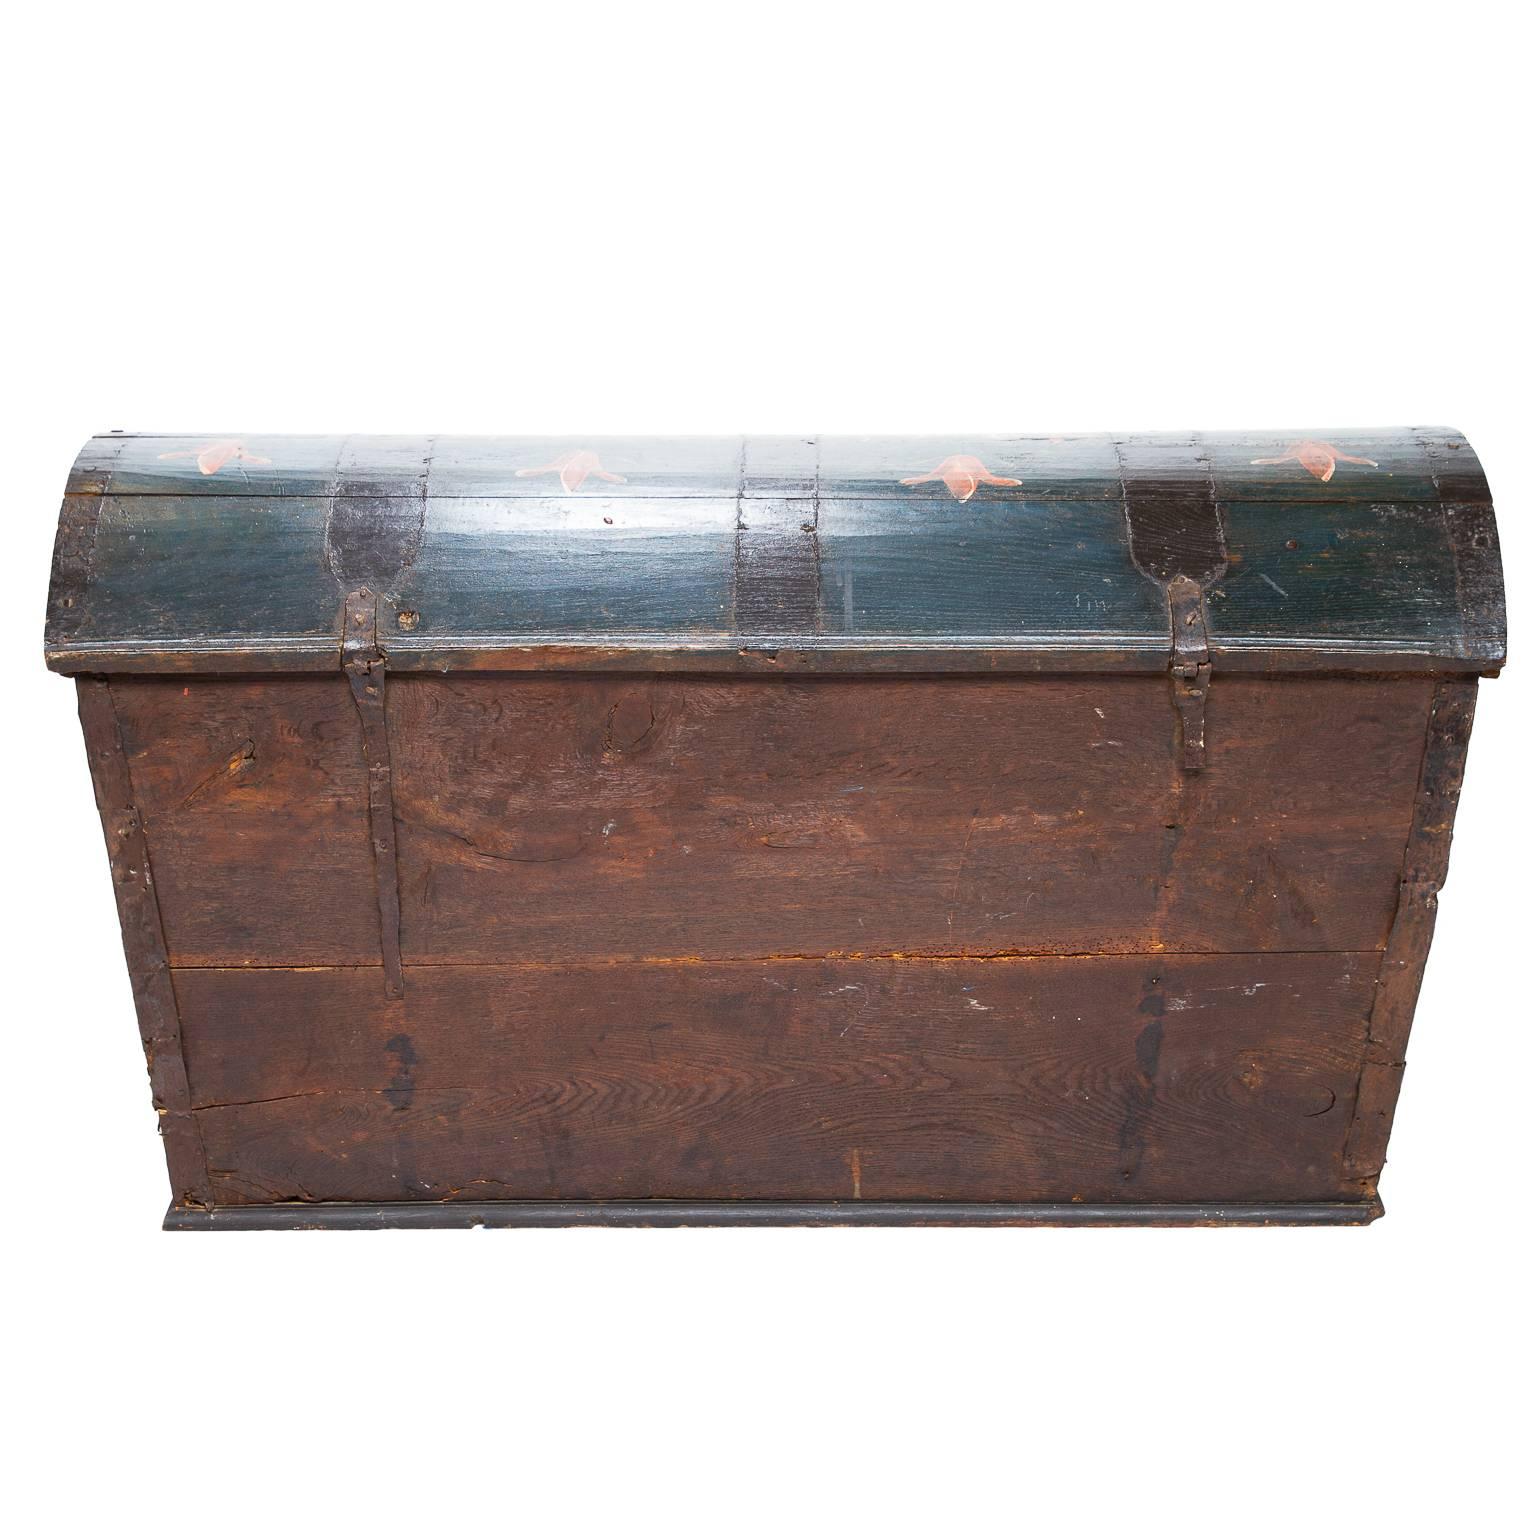 Forged 19th Century Swedish Hand-Painted Dome Top Chest